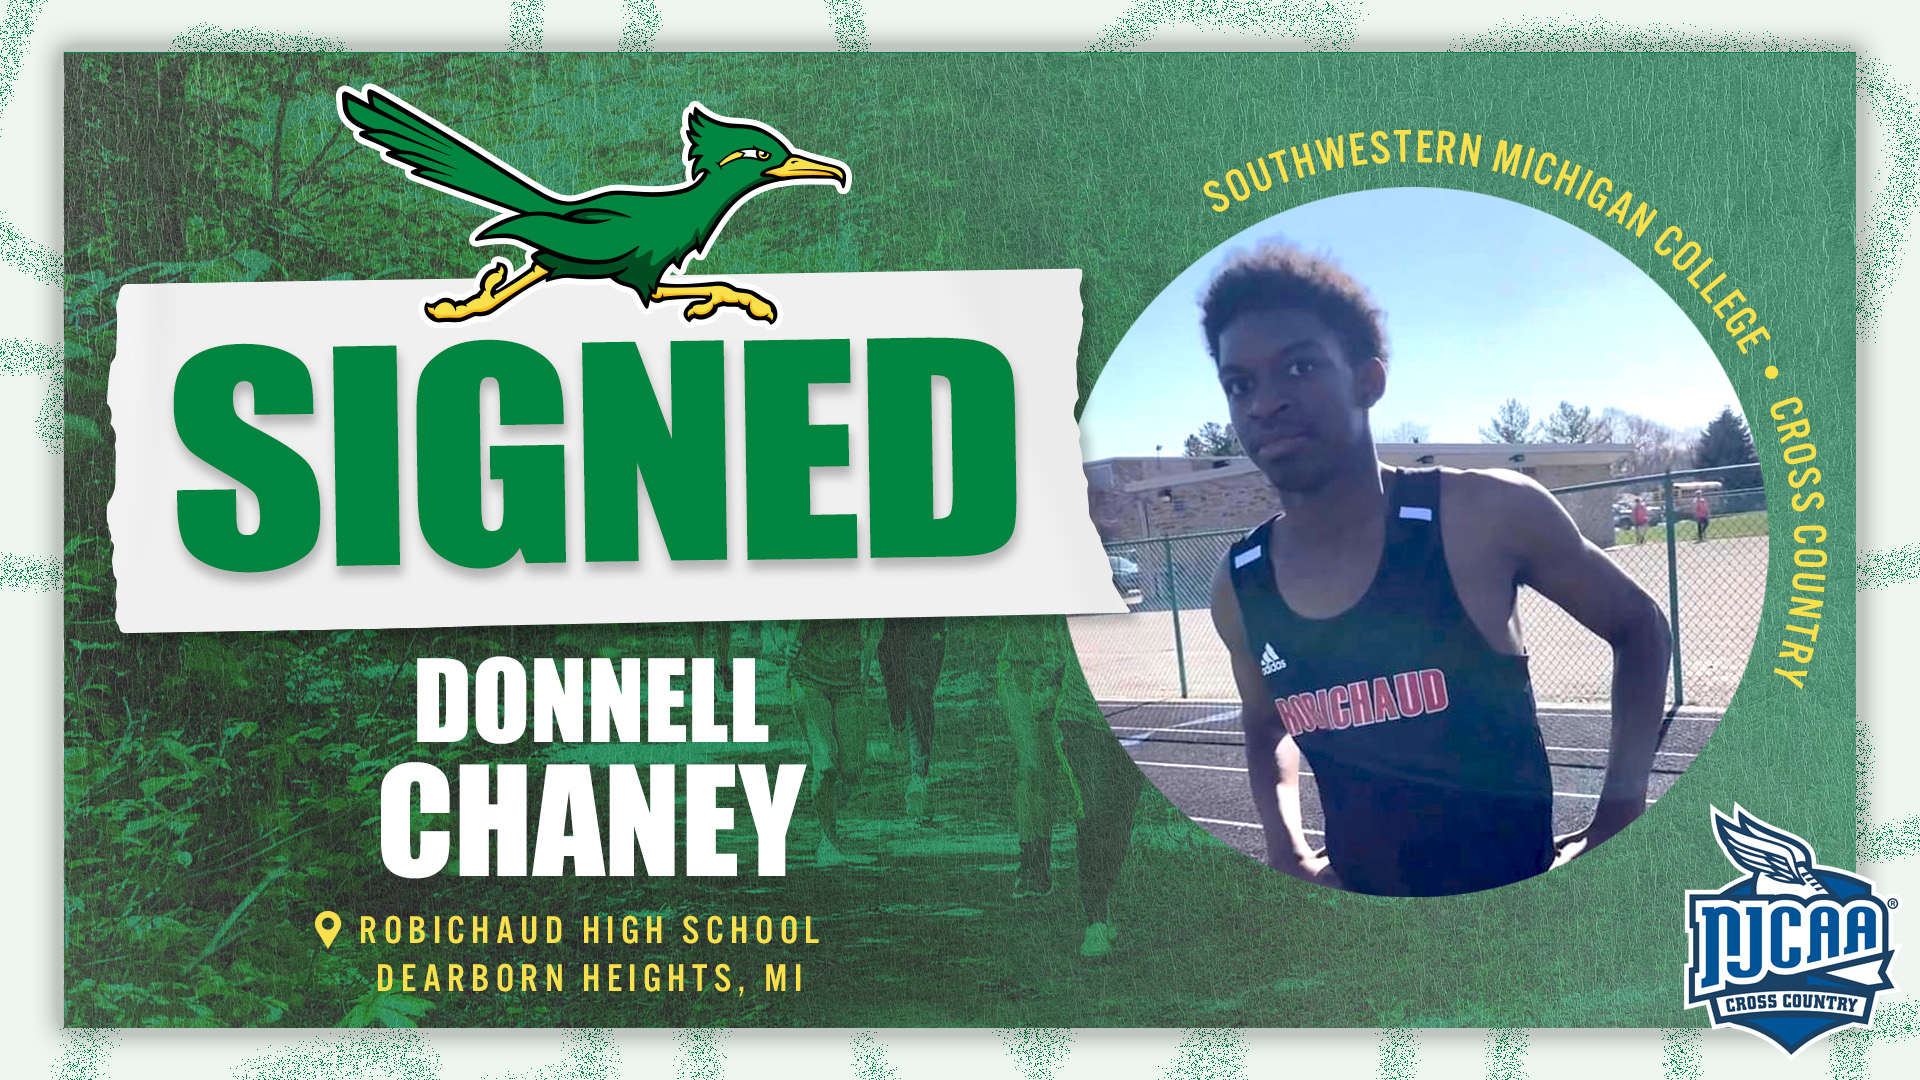 Donnell Chaney Now a Roadrunner